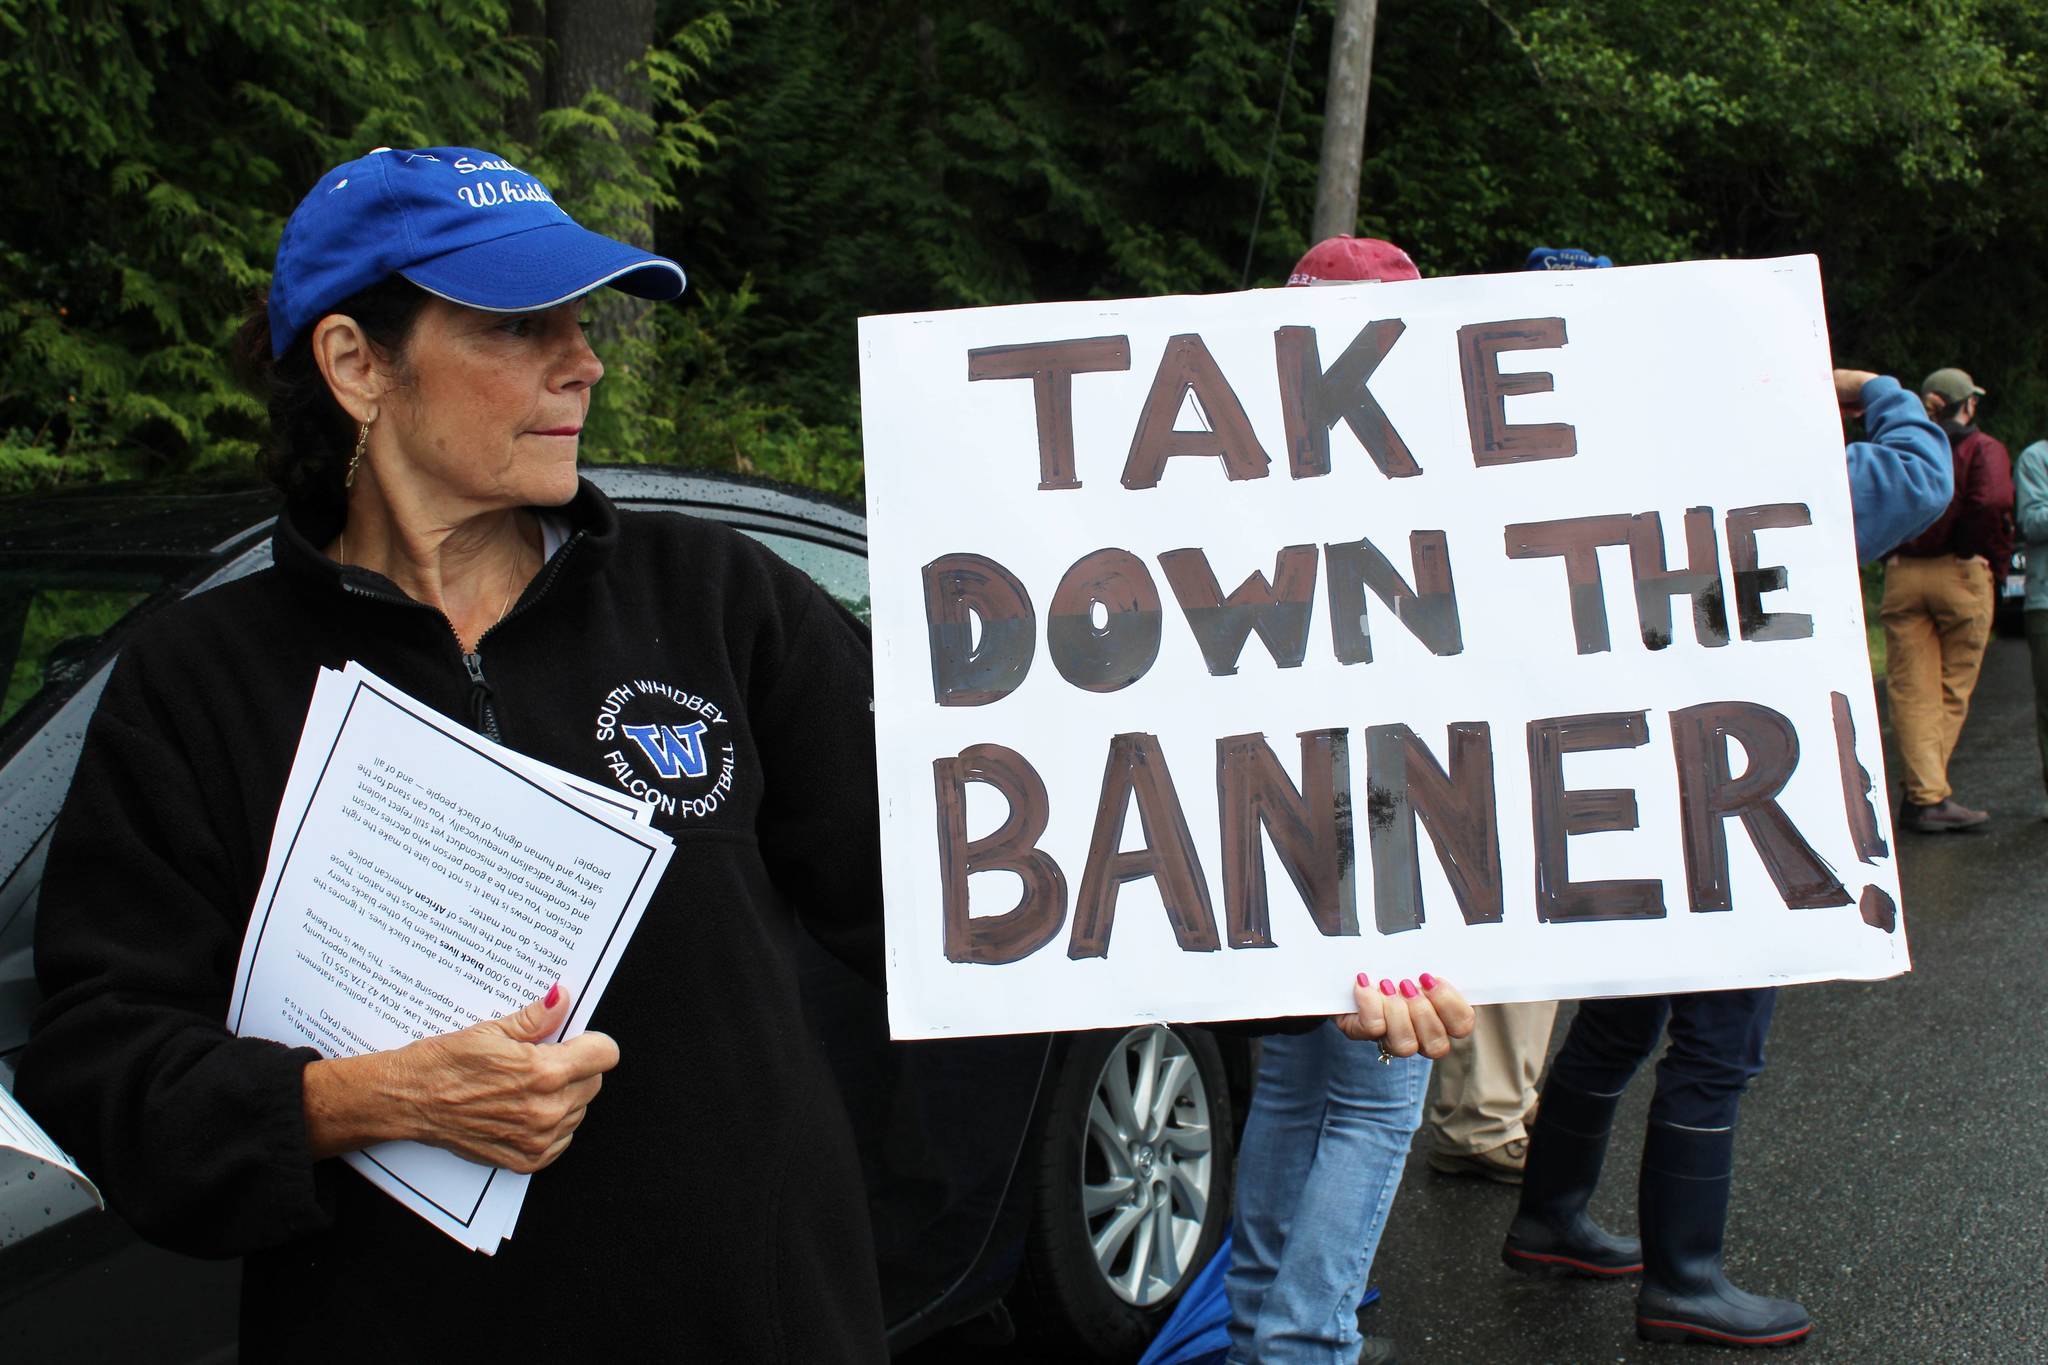 Maureen Greene displays a sign and distributes informational papers opposing the Black Lives Matter banner at the June 11 protest. (Photo by Karina Andrew/Whidbey News-Times)